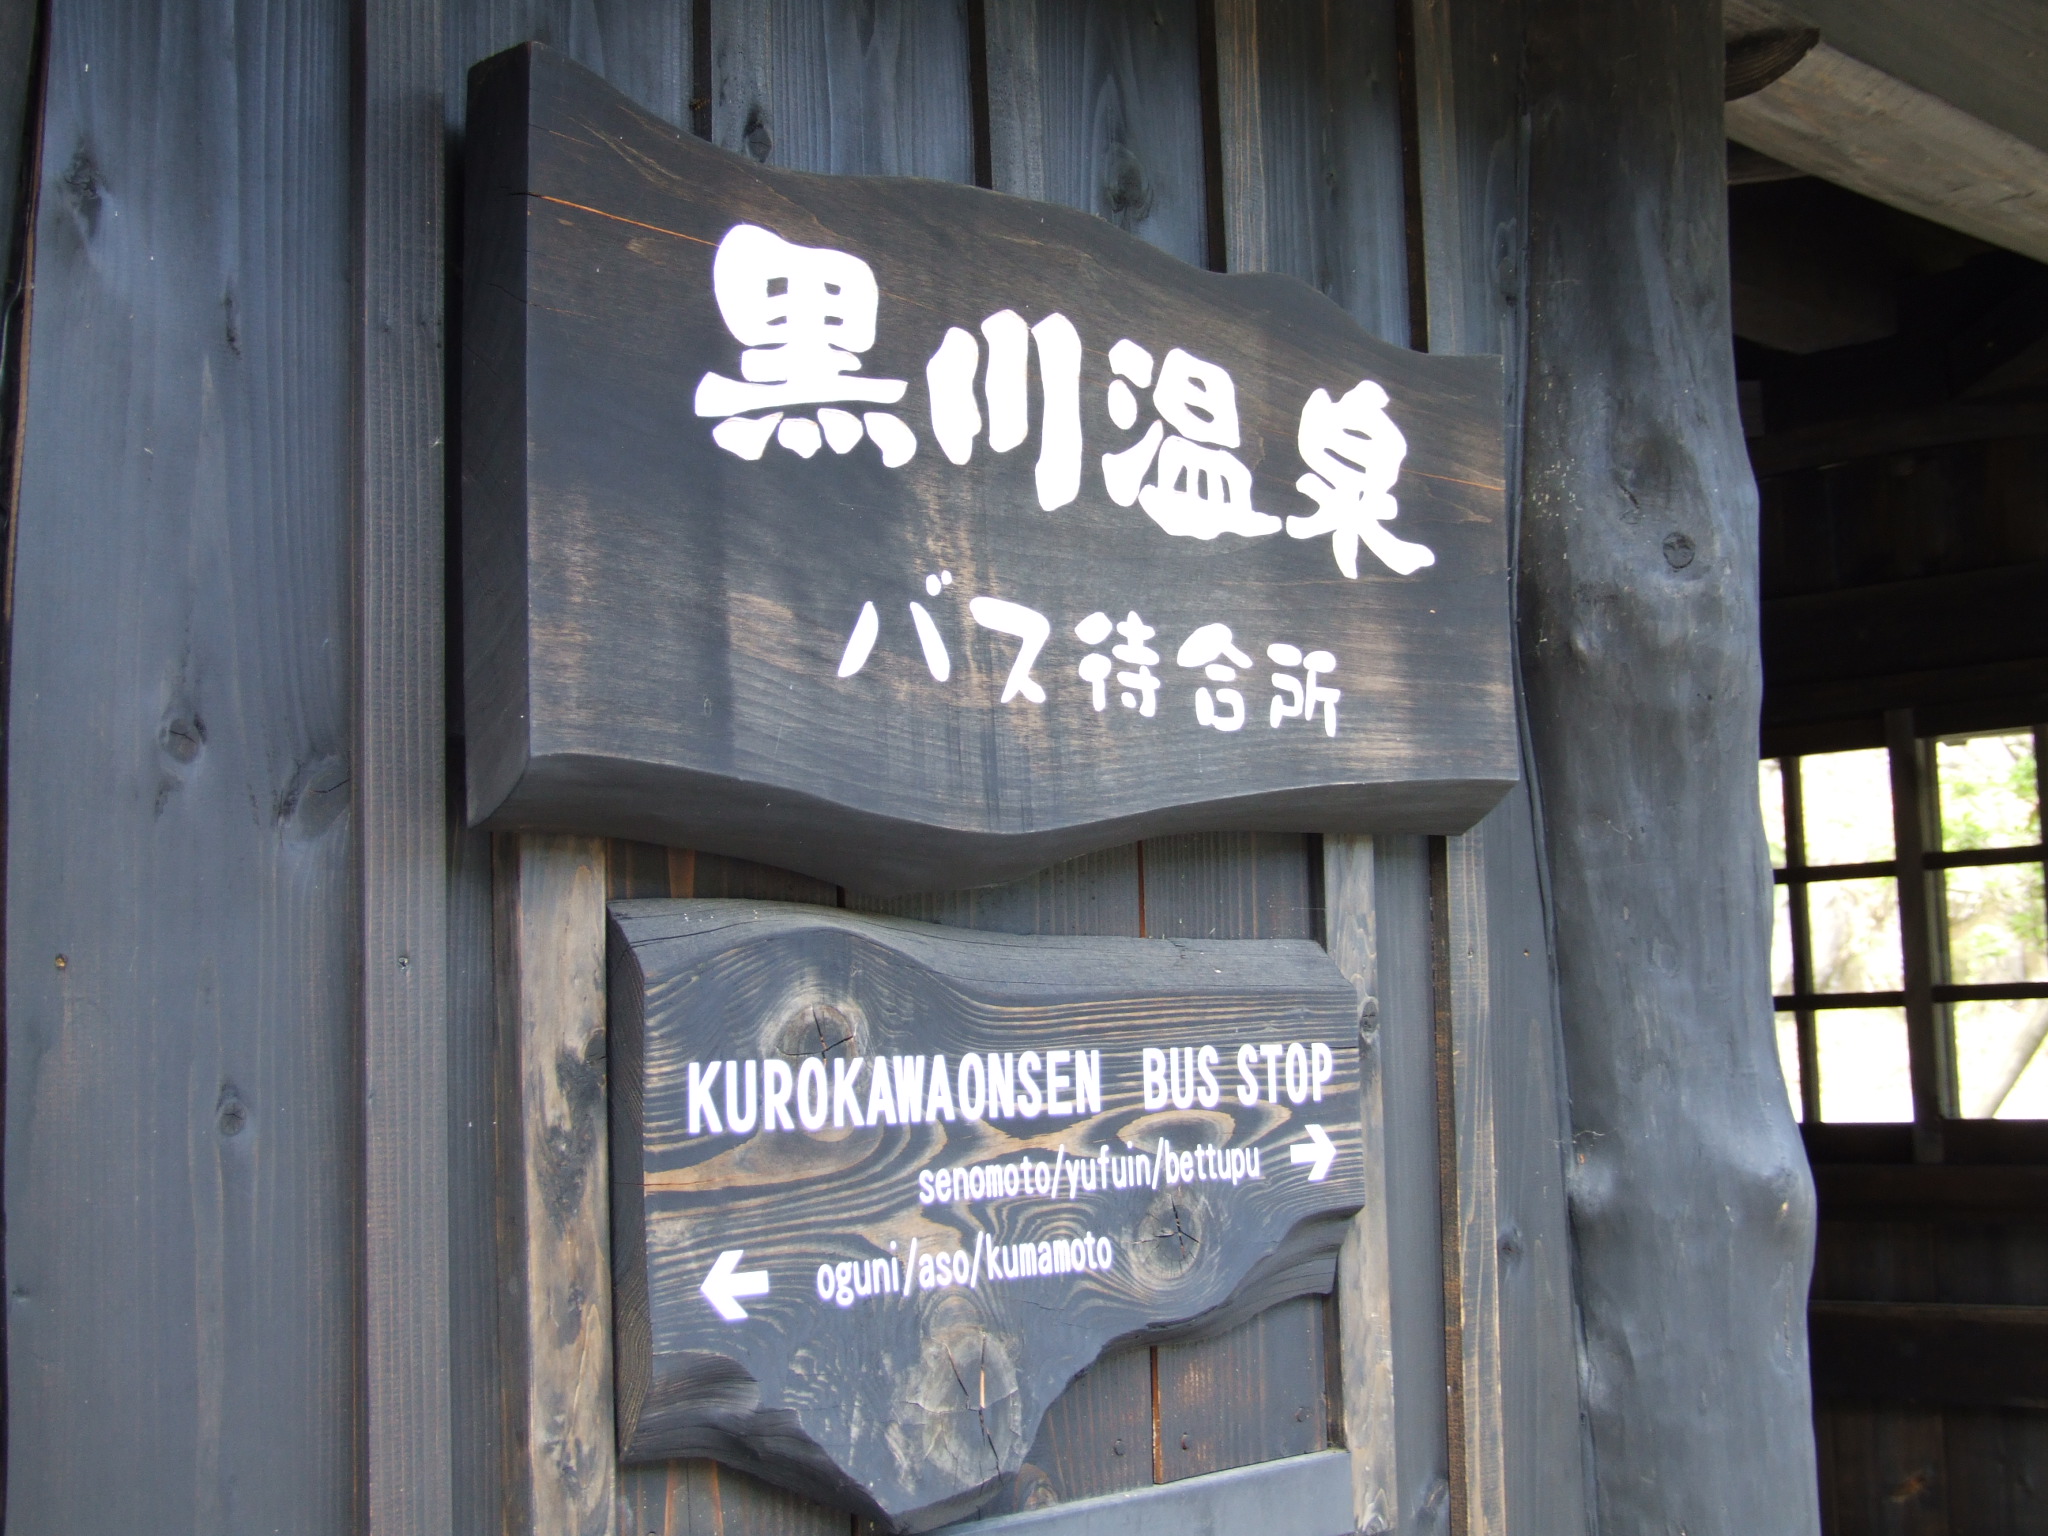 Escape your daily-life’s stress at Kumamoto Onsen (hot springs)